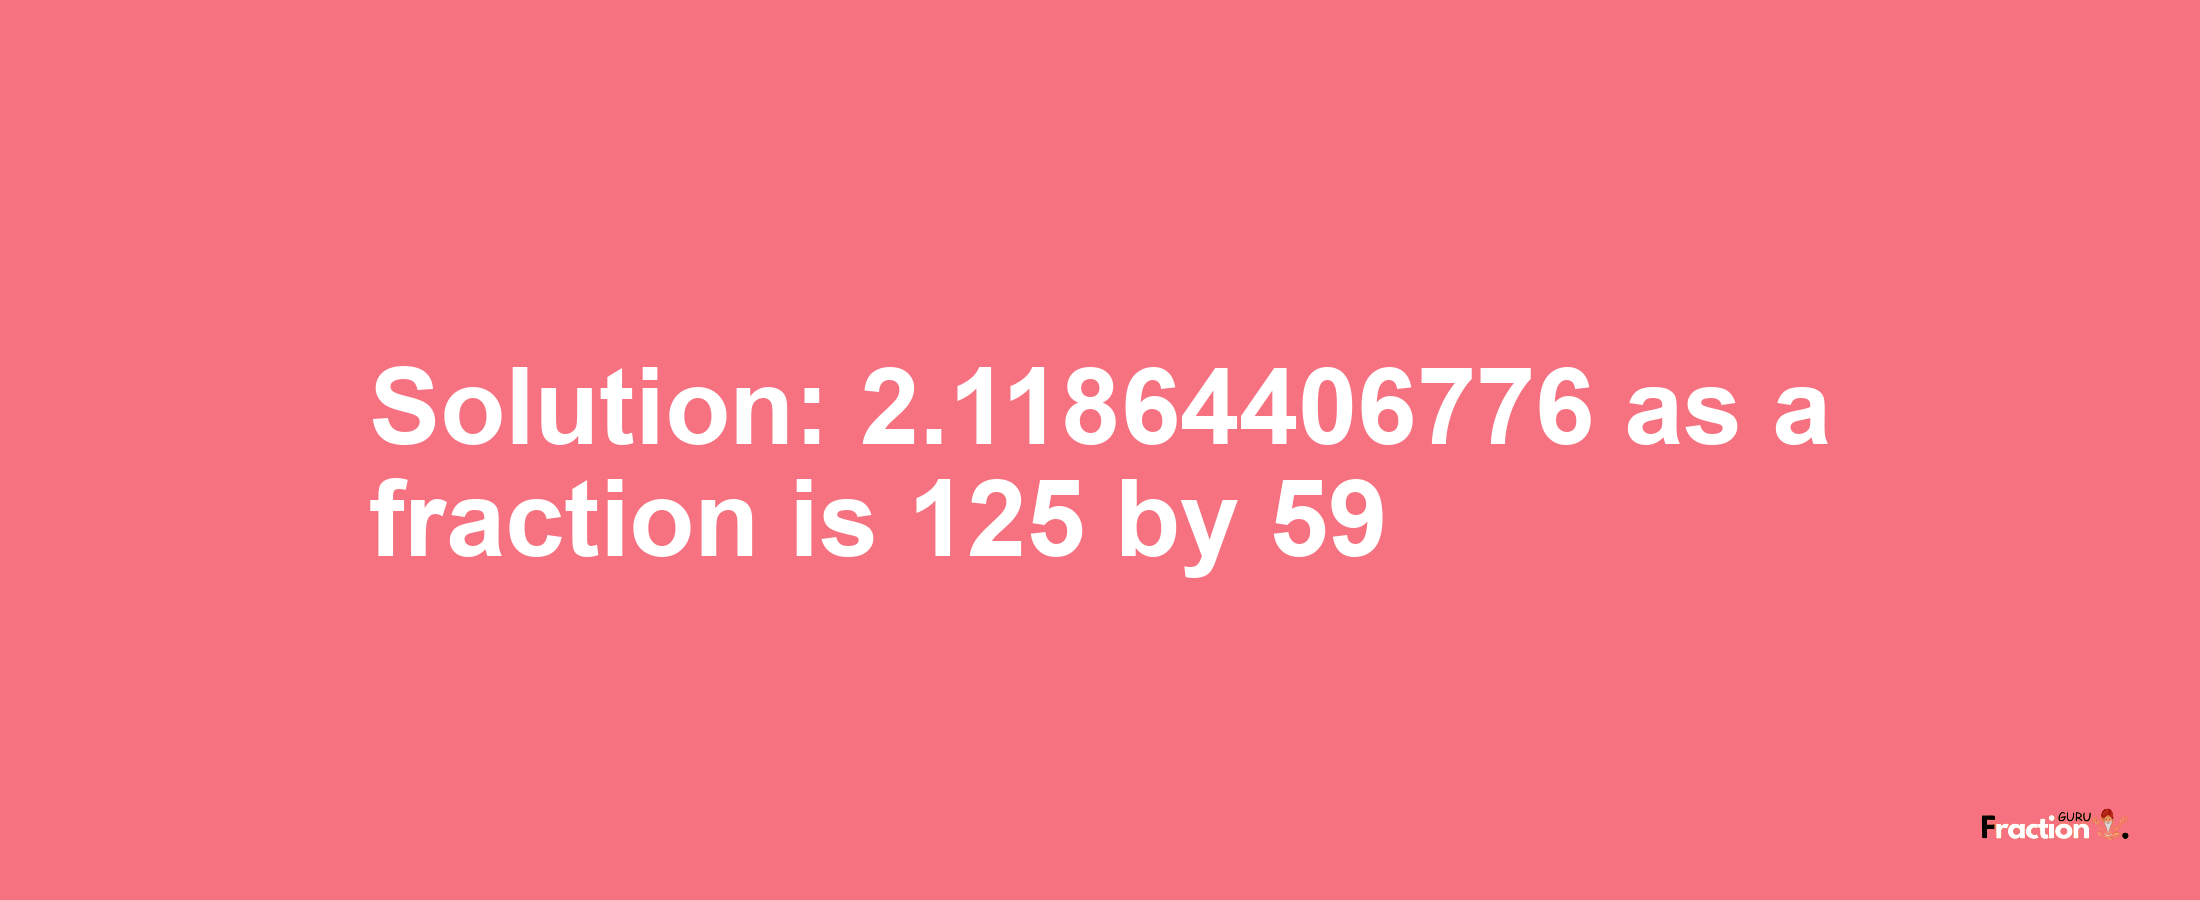 Solution:2.11864406776 as a fraction is 125/59